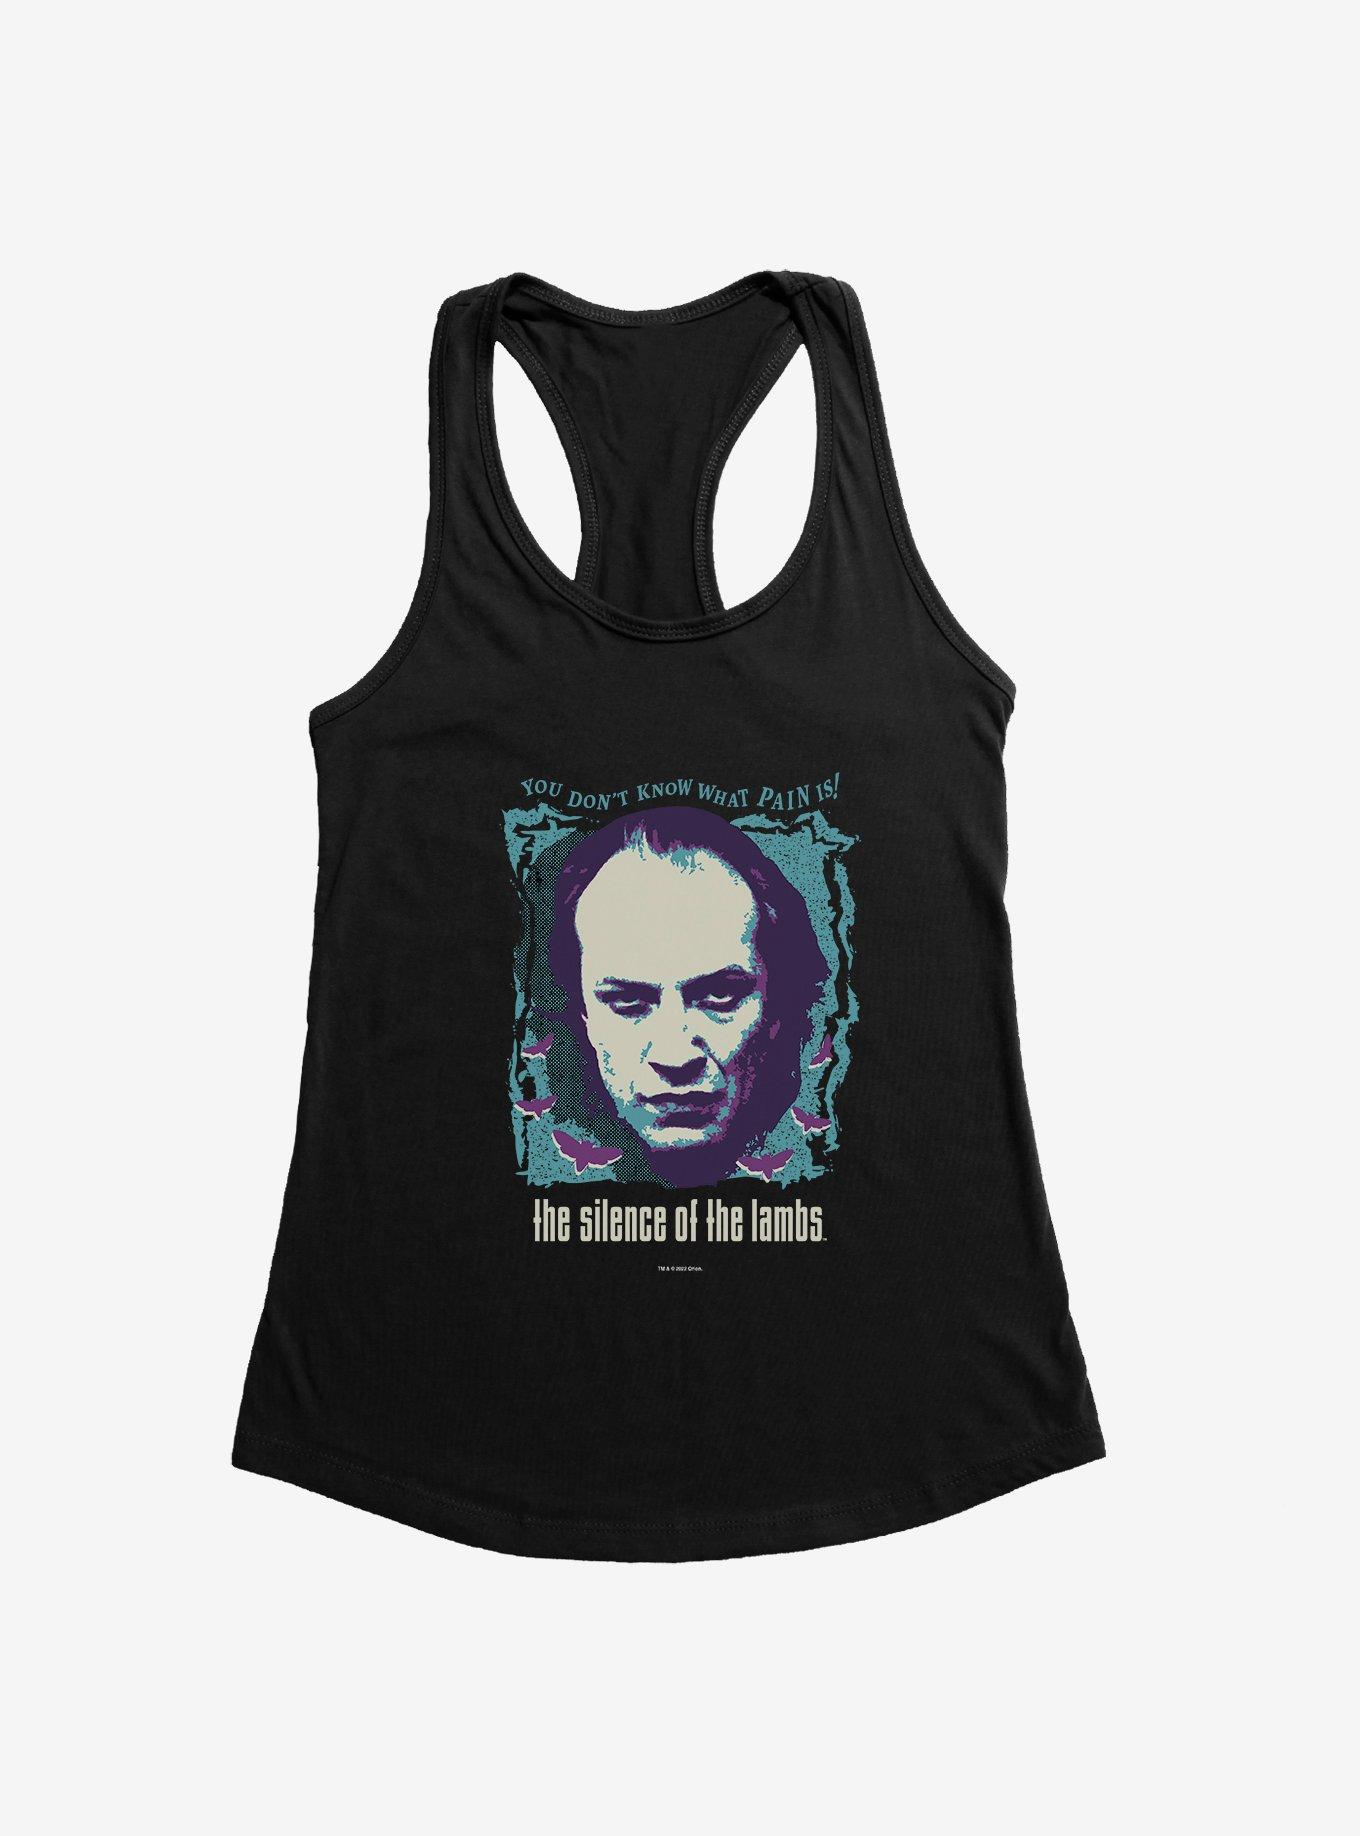 The Silence Of Lambs What Pain Is! Girls Tank